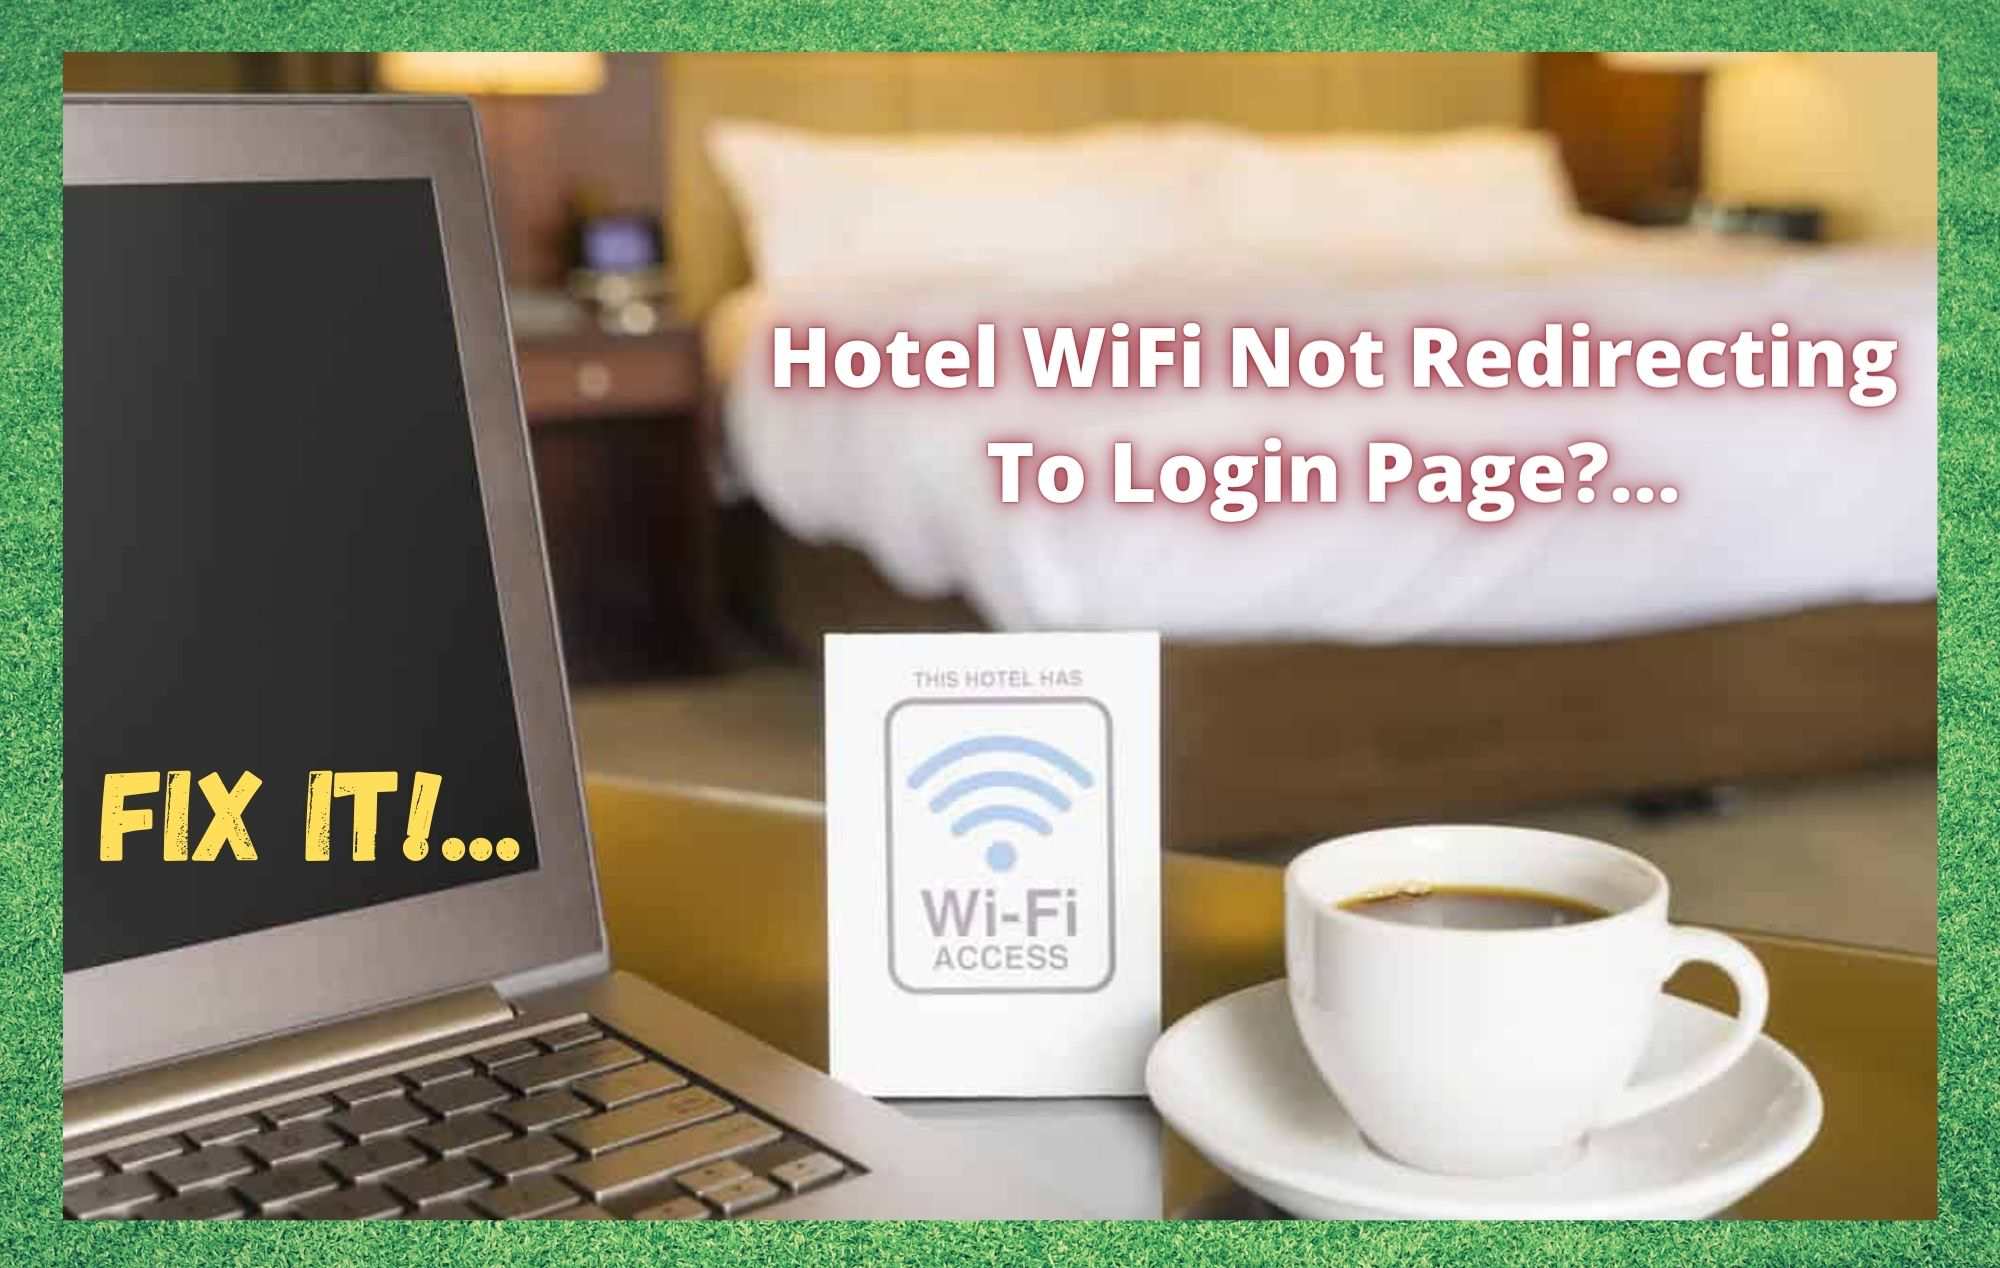 Hotel WiFi Not Redirecting To Login Page